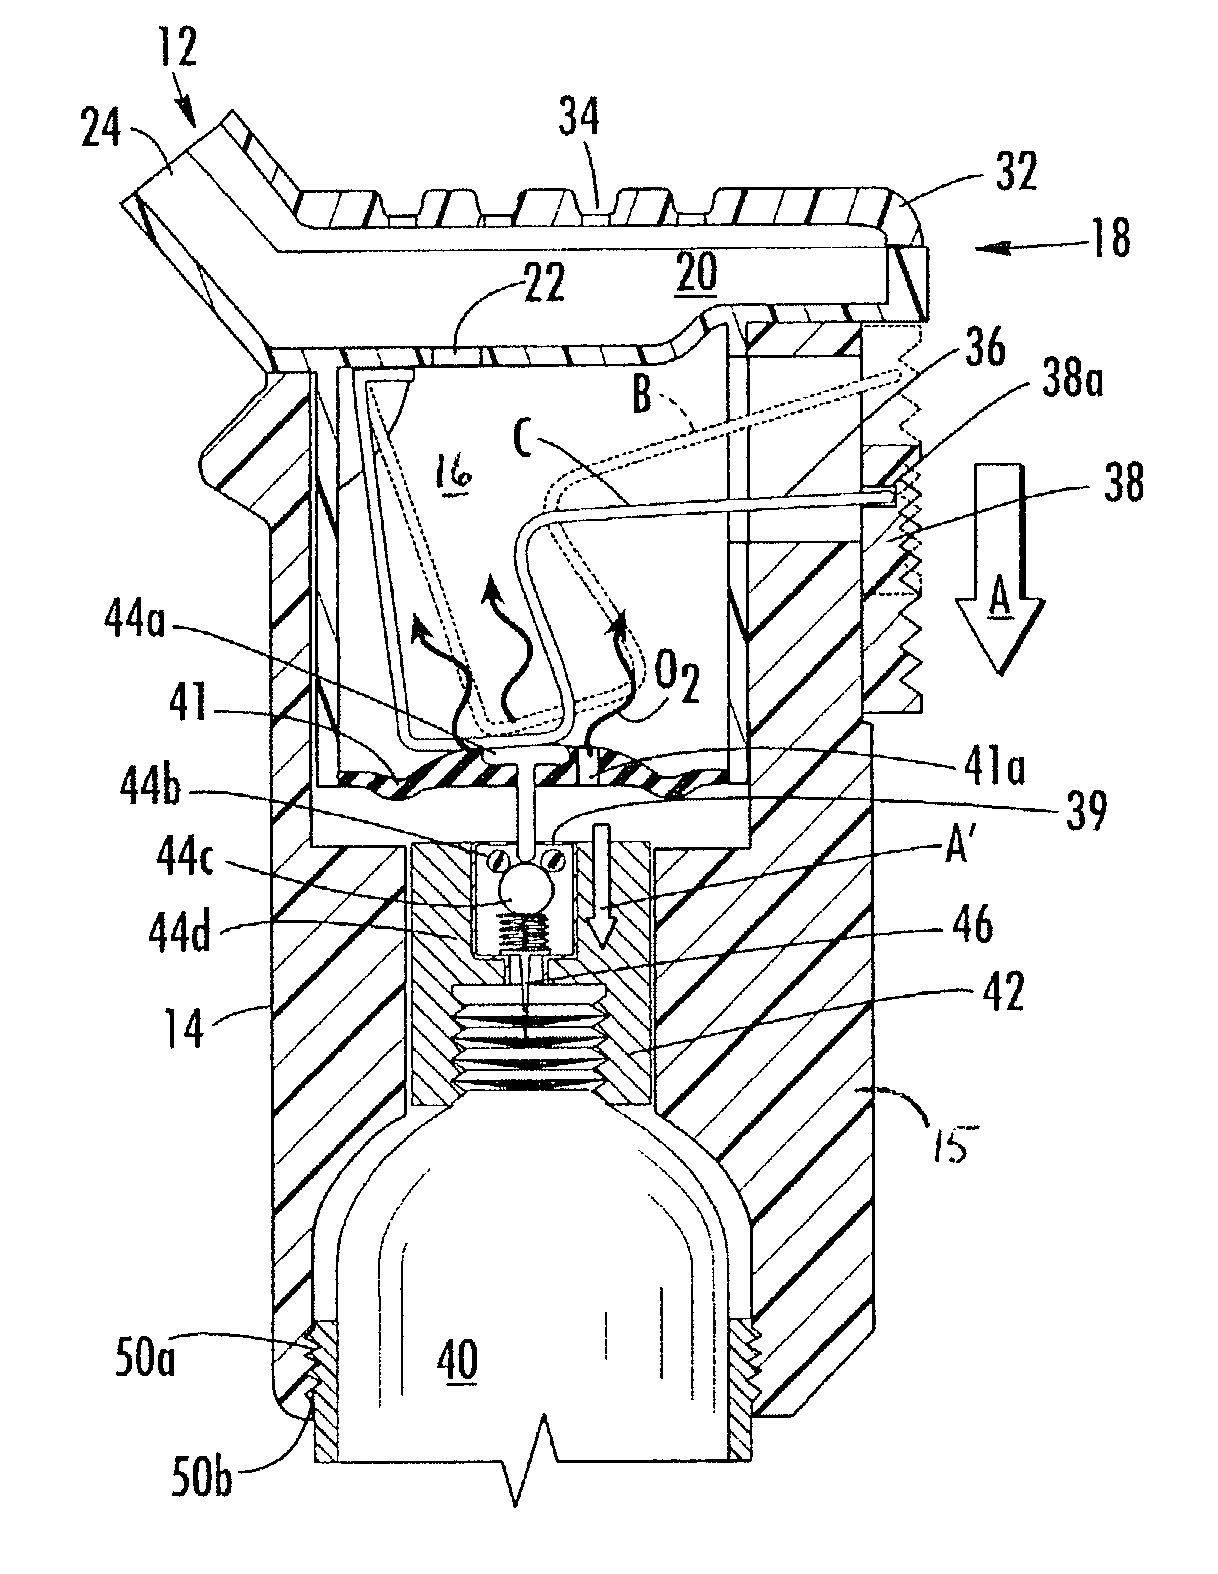 Oxygen delivery system